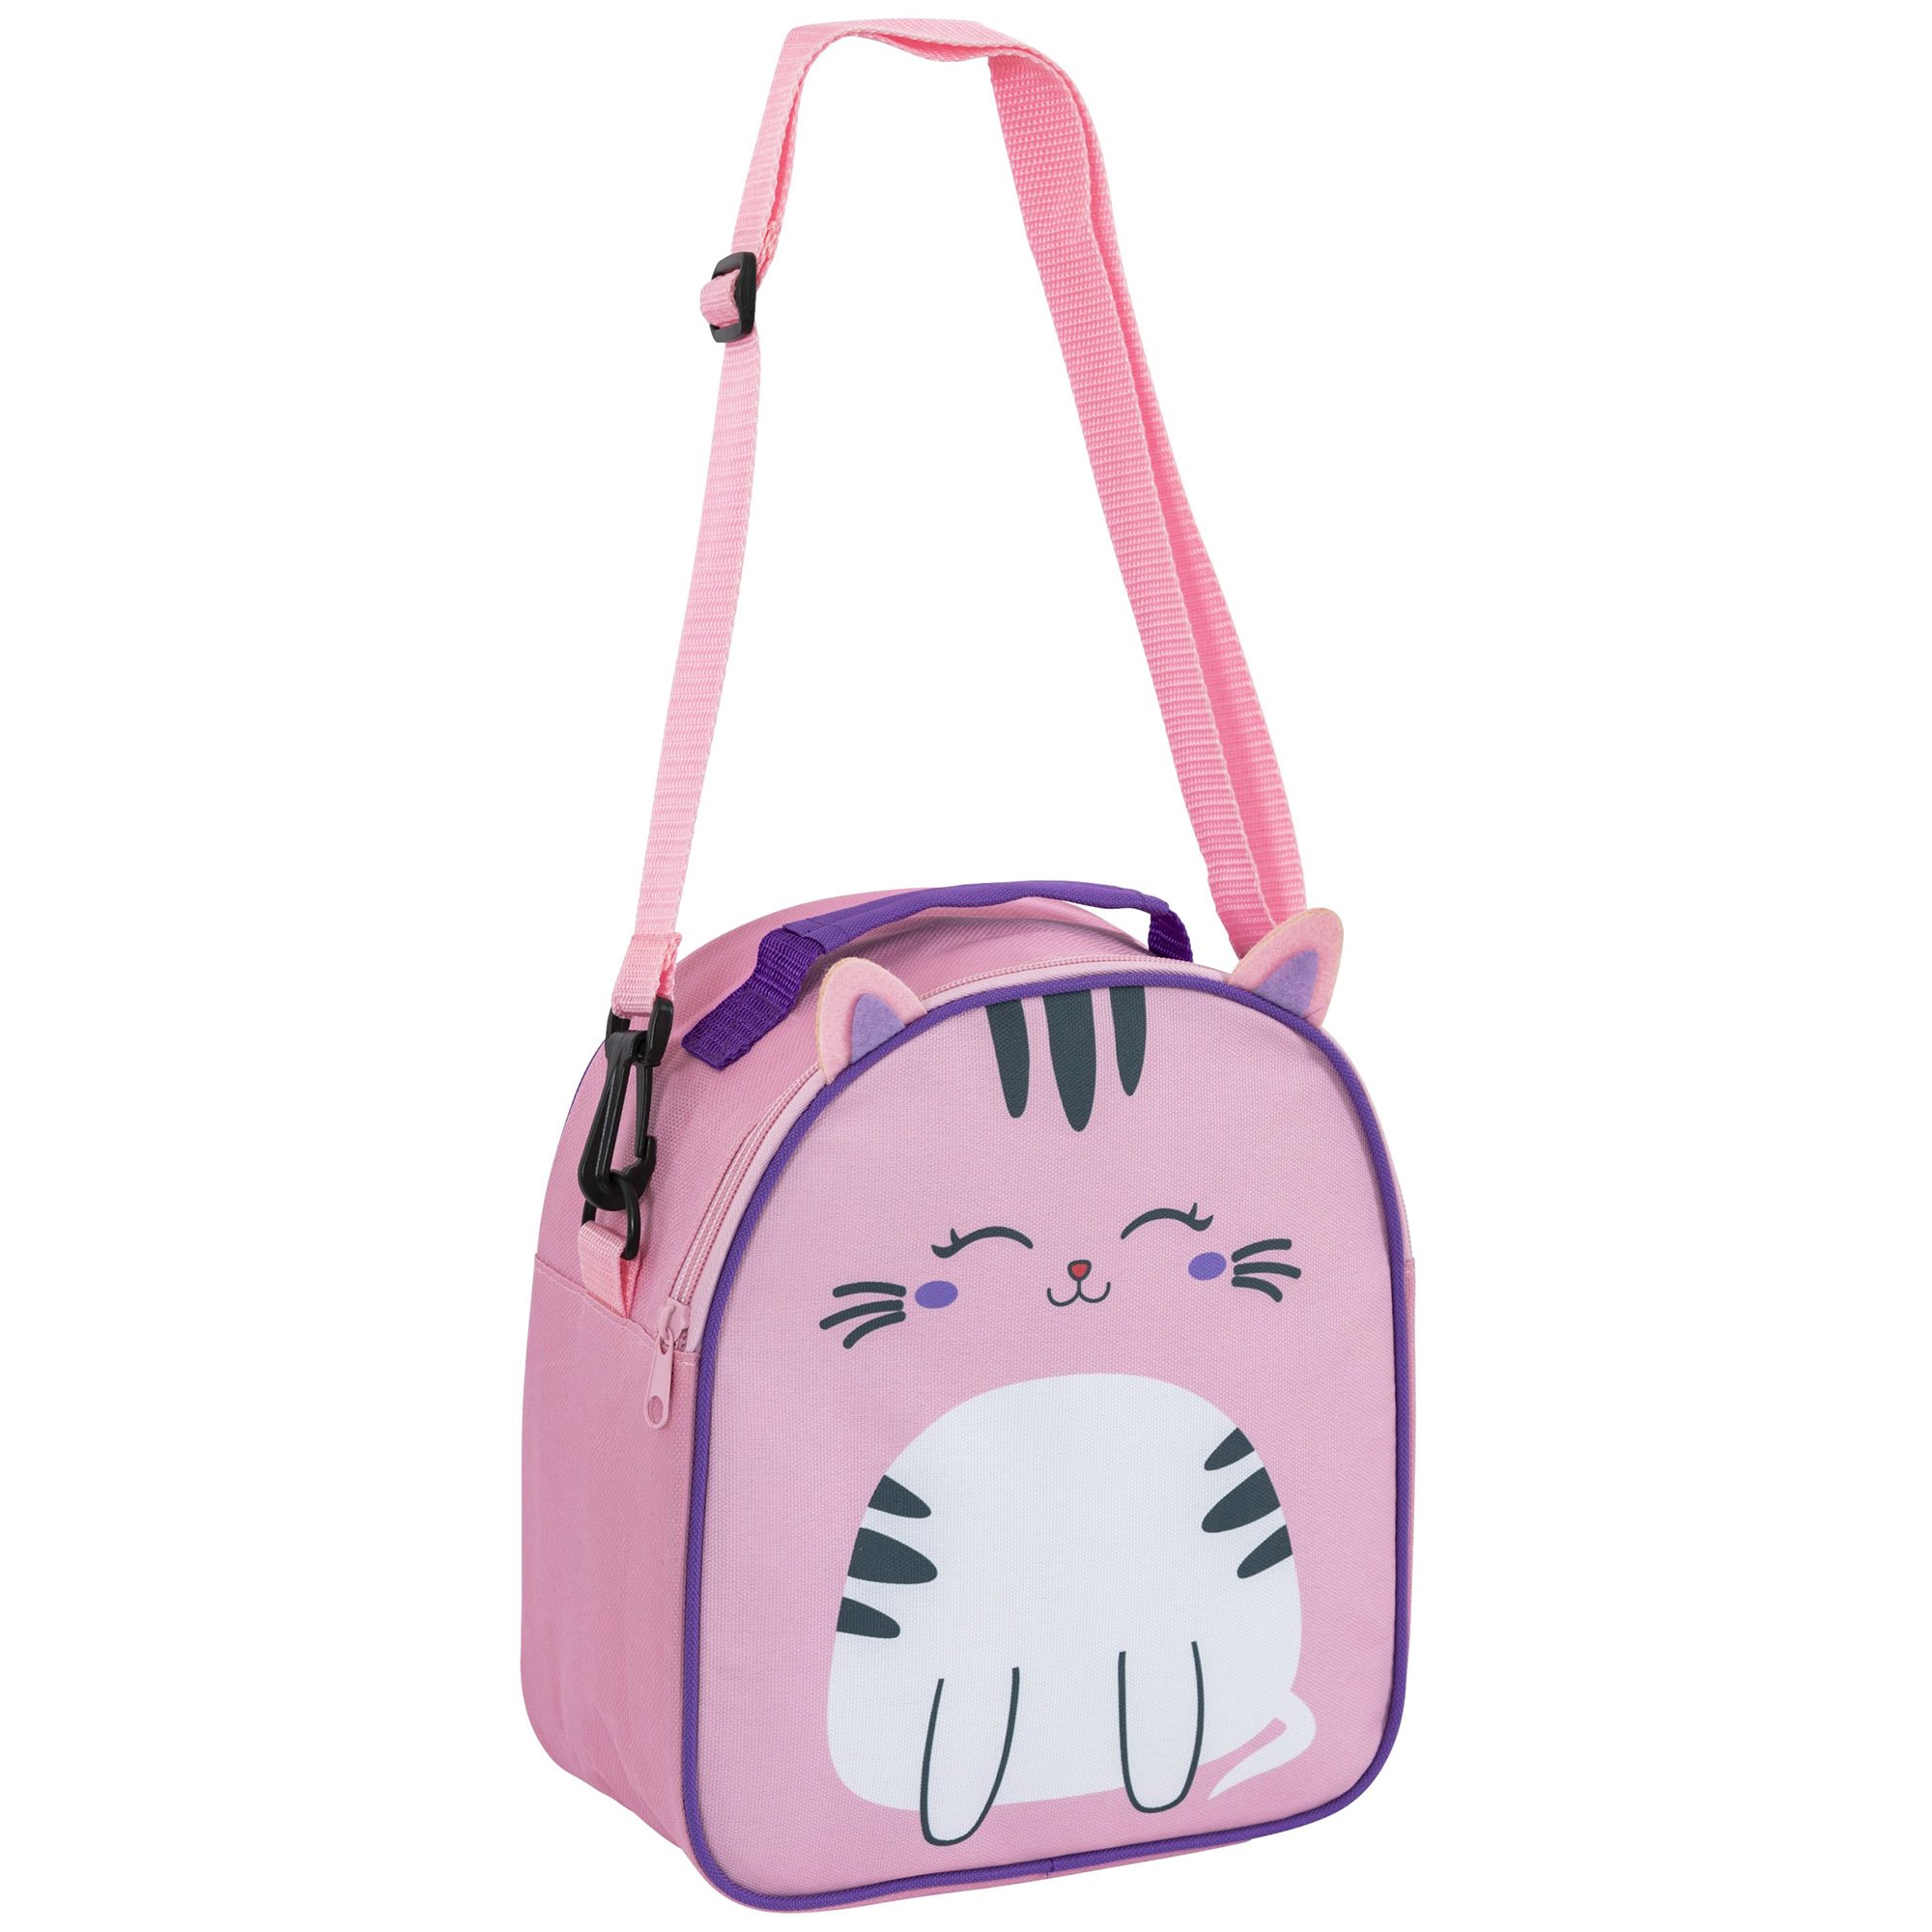 Fun Animal Snack Bag for Kids | Lightweight and insulated Lunch Bag With  Strap